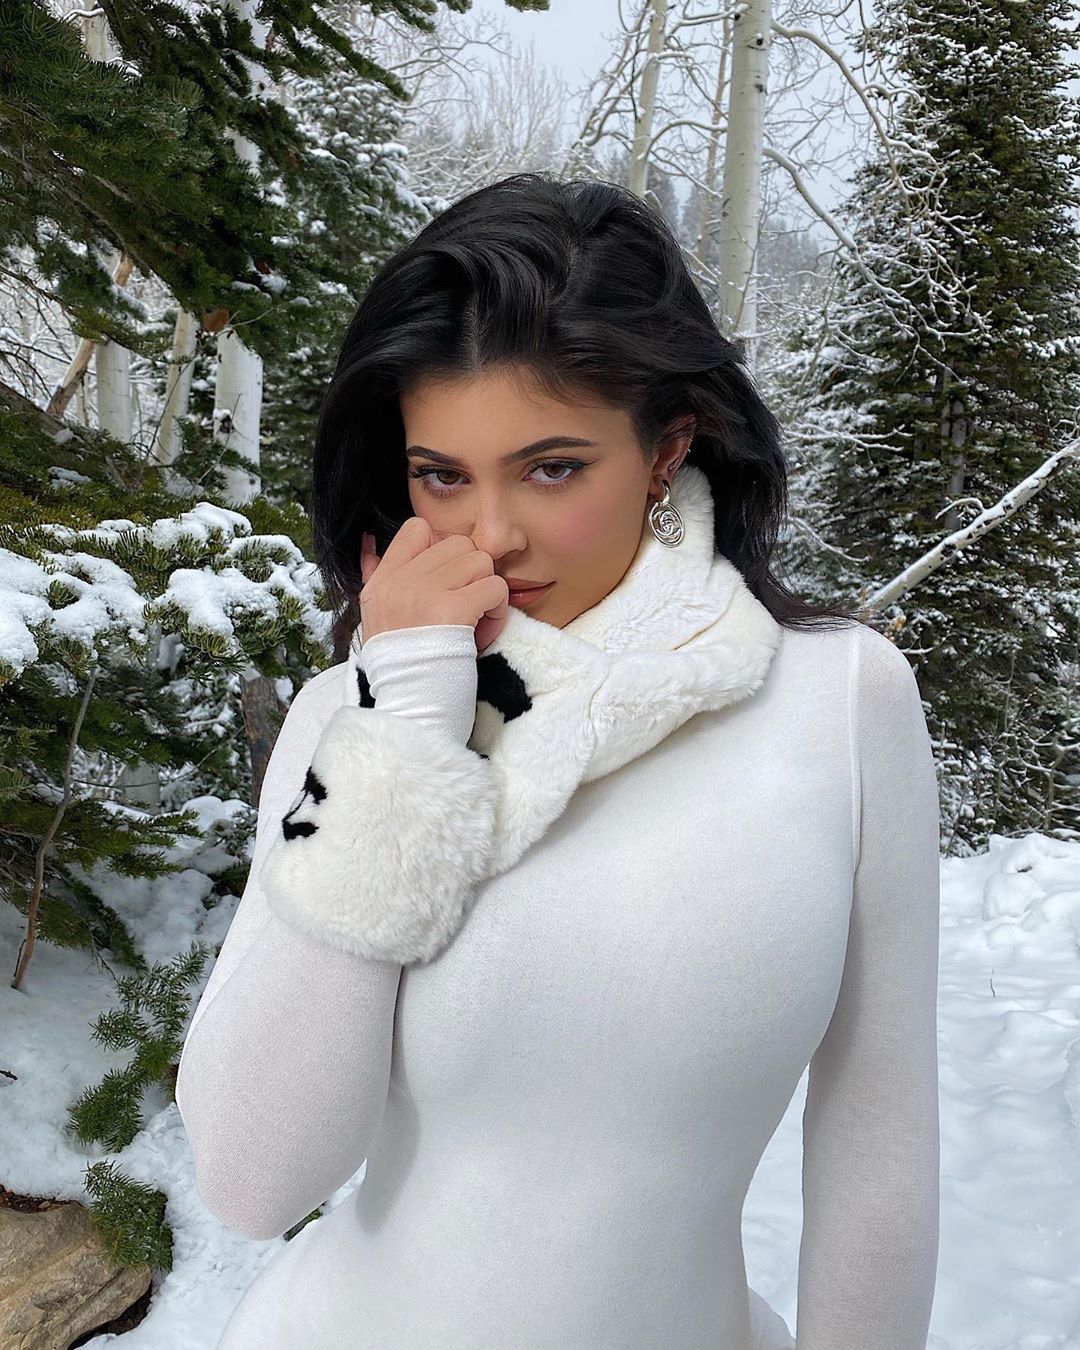 Kylie Jenner posing in white Chanel bodysuit on winter vacation